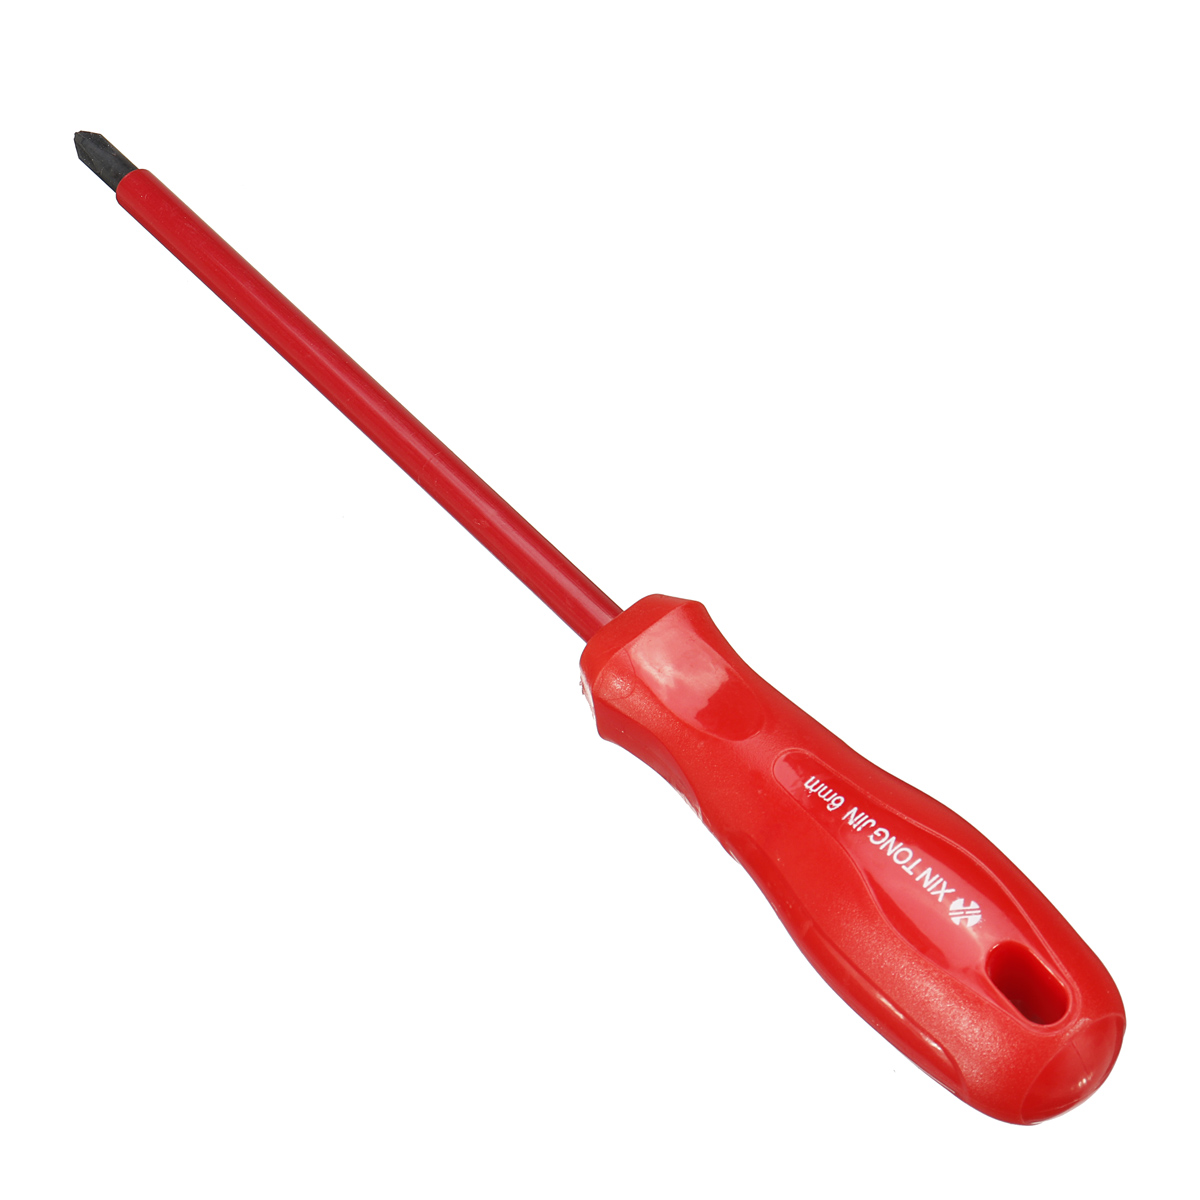 1000V-Electronic-Insulated-Hand-Screwdriver-Repair-Tool-1633166-4